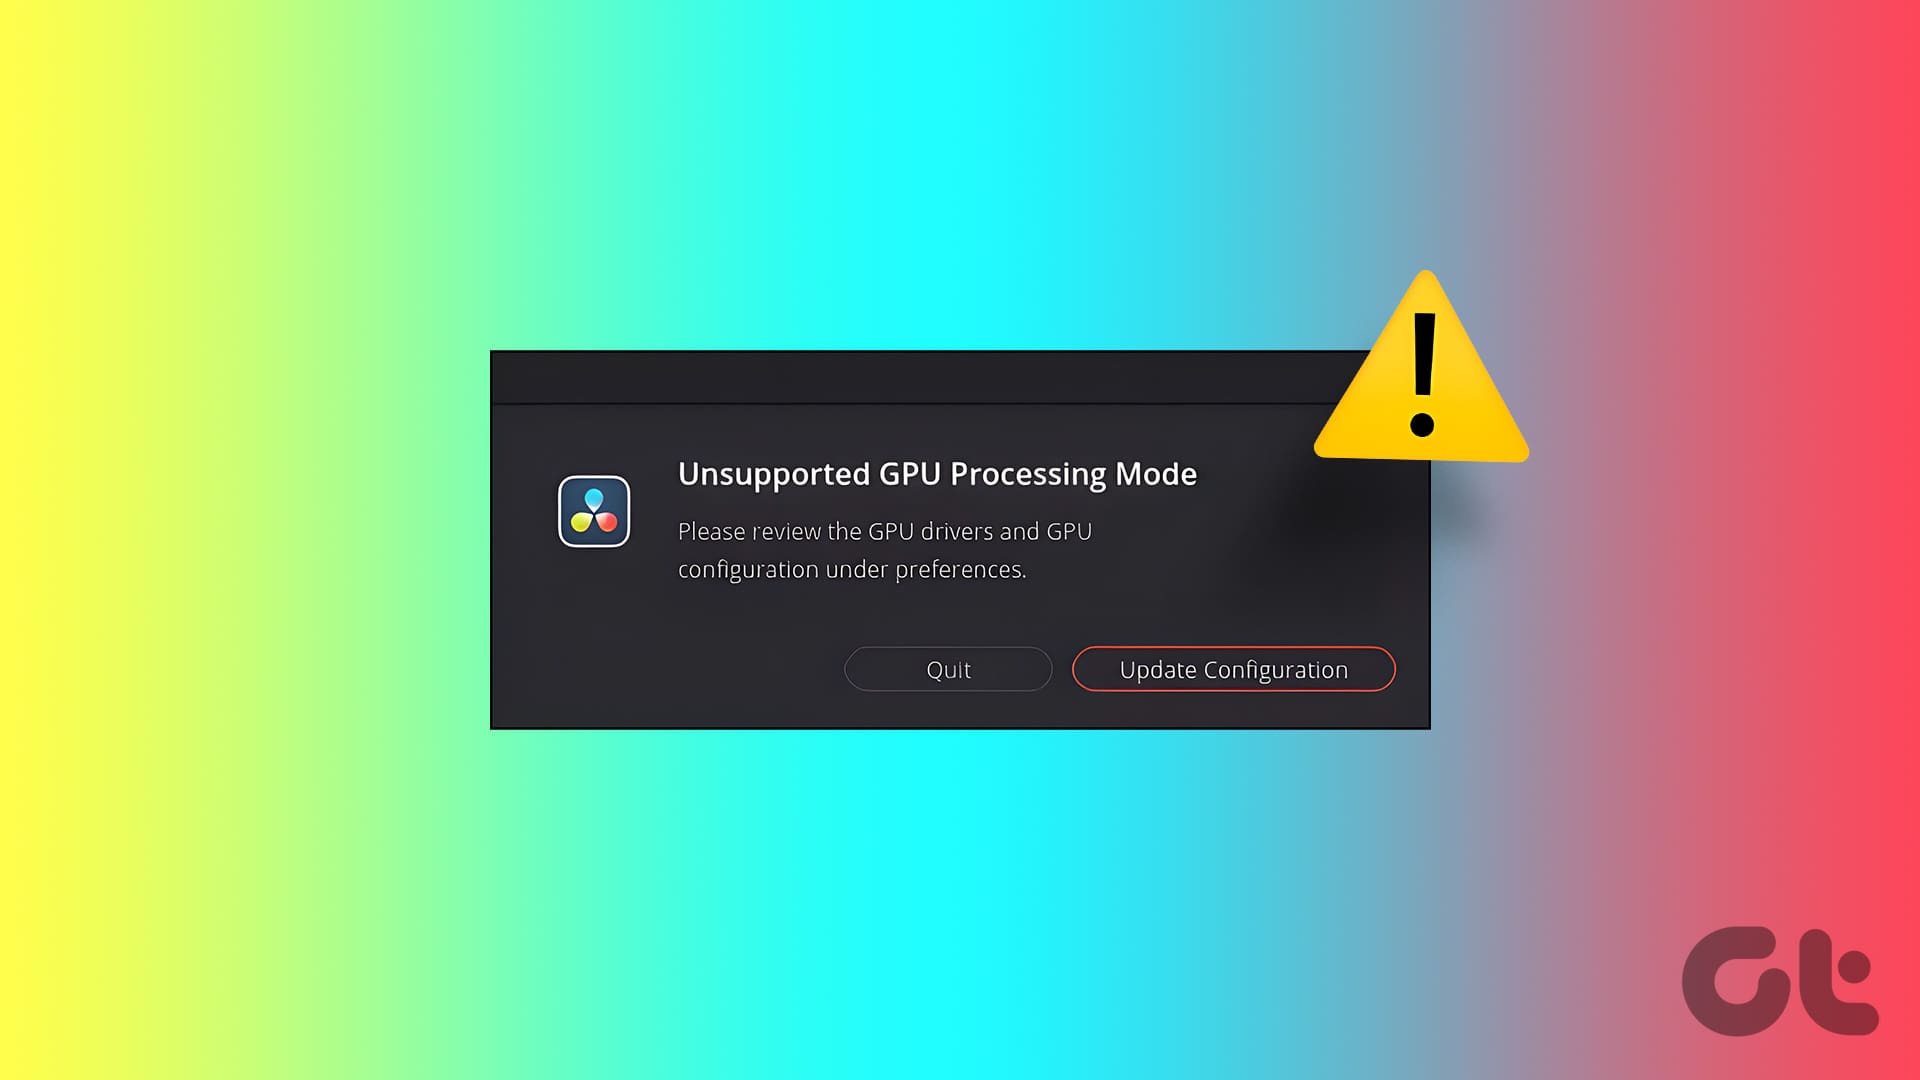 How to Fix DaVinci Resolve “Unsupported GPU Processing Mode” on Windows in 2023